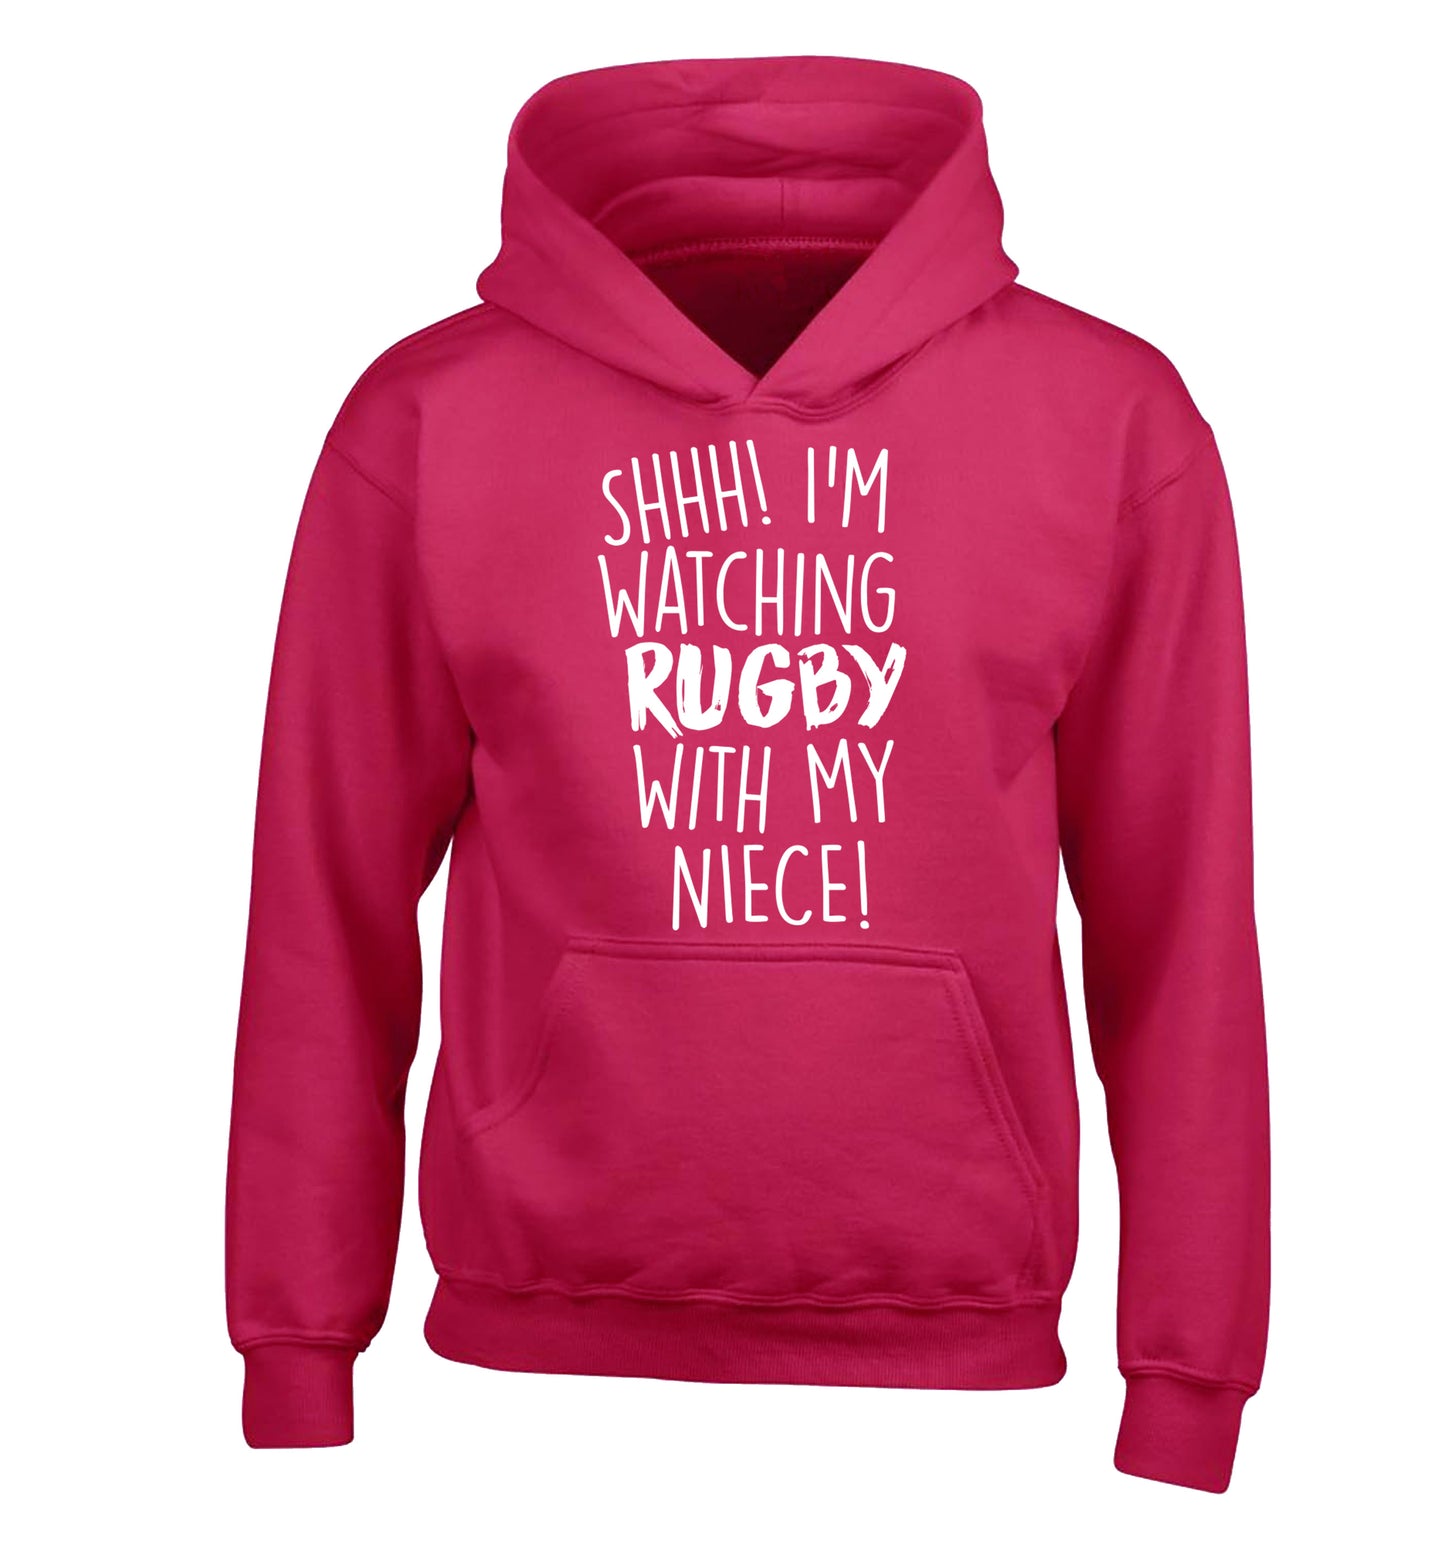 Shh.. I'm watching rugby with my niece children's pink hoodie 12-13 Years